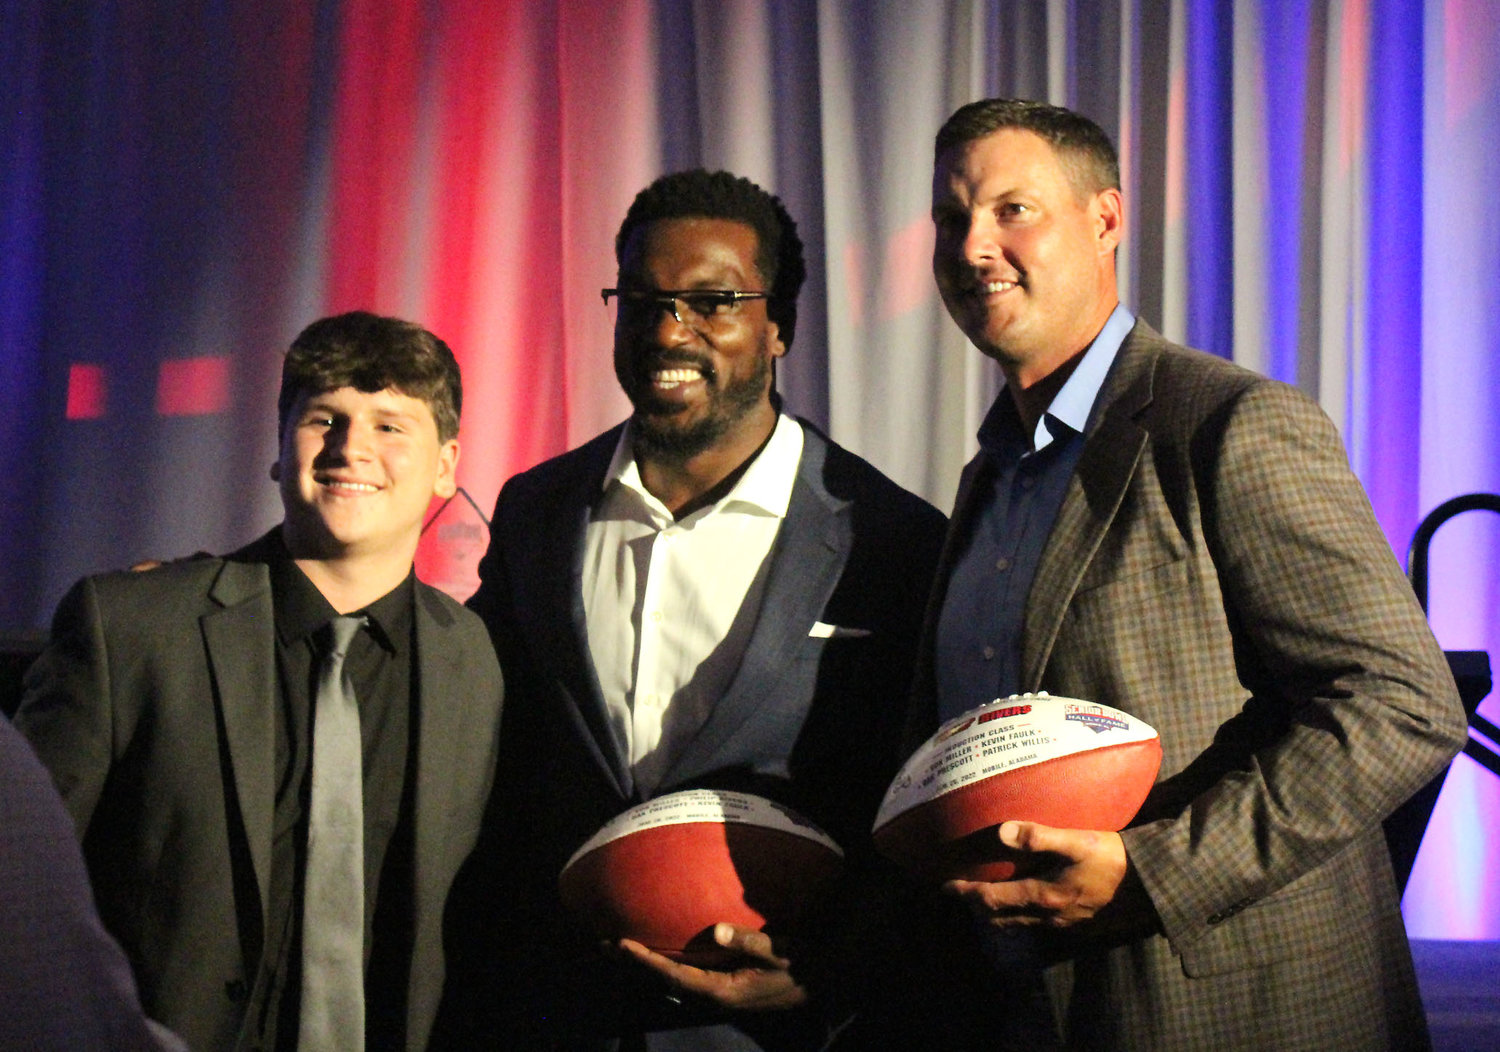 Senior Bowl Hall of Famers Philip Rivers and Patrick Willis pose for a picture after Sunday night’s induction ceremony at the Grand Hotel Golf Club & Spa in Point Clear.